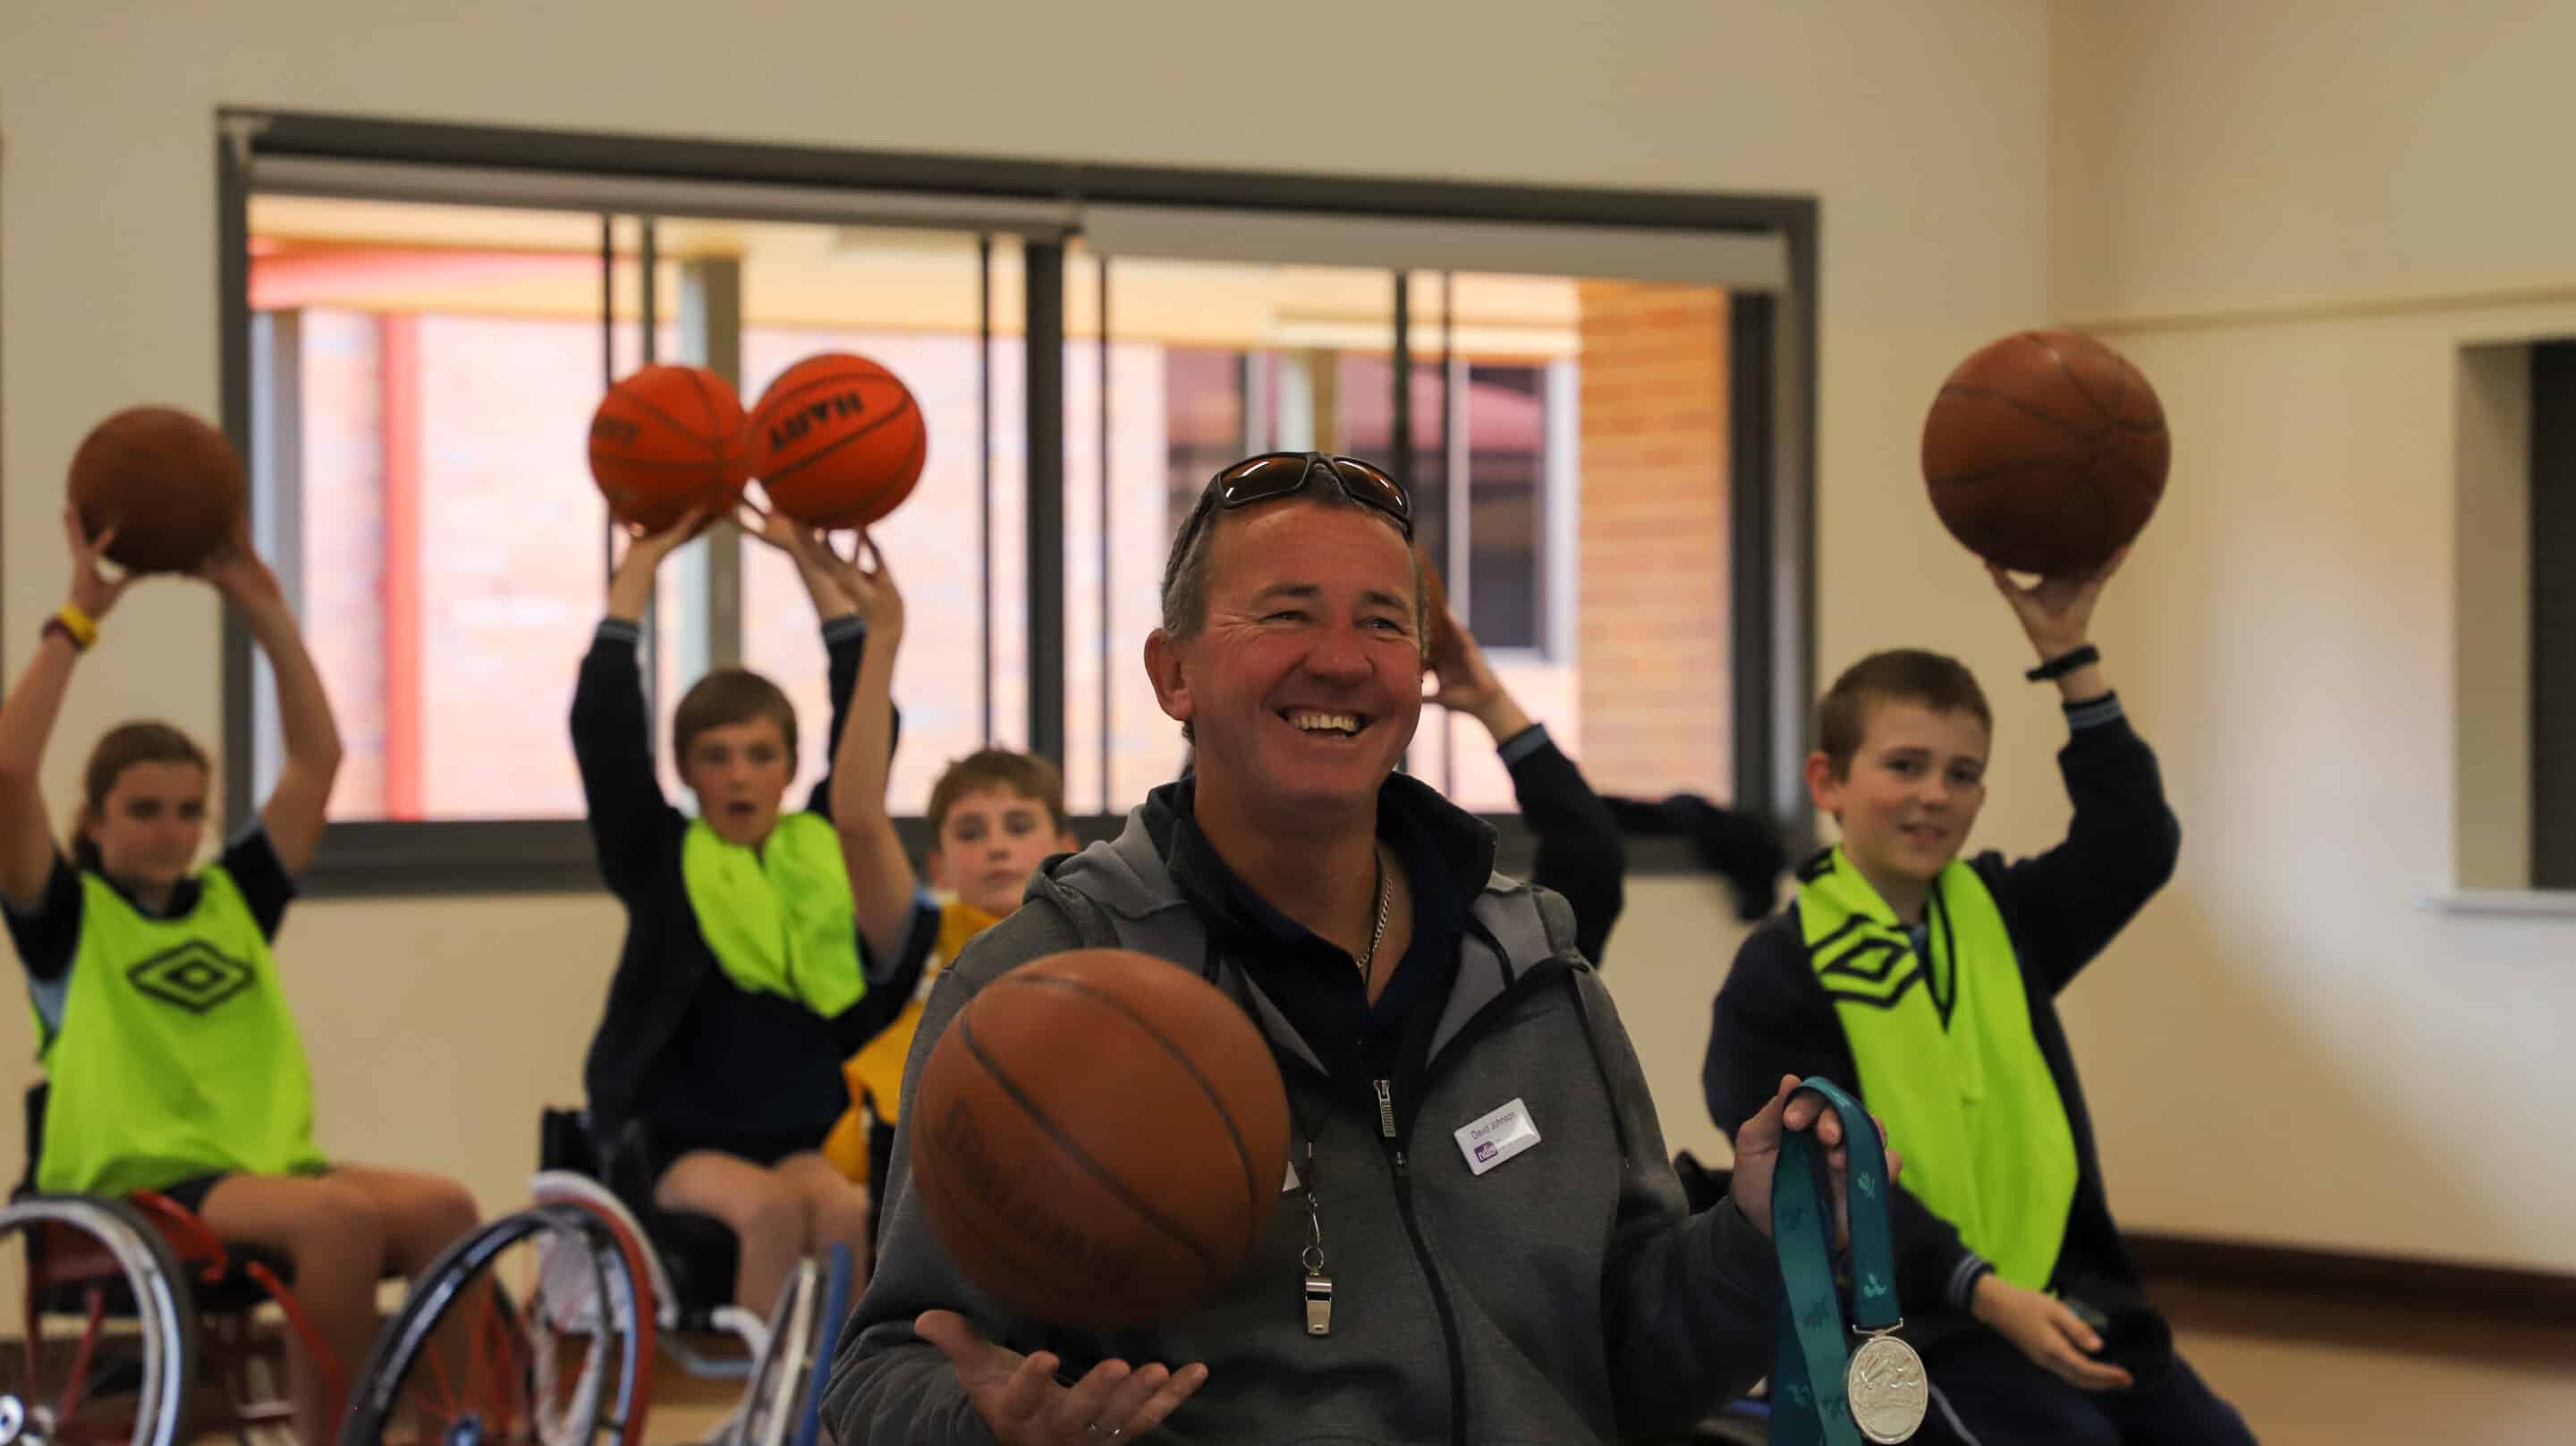 Ball sports are better on wheels … in Alstonville